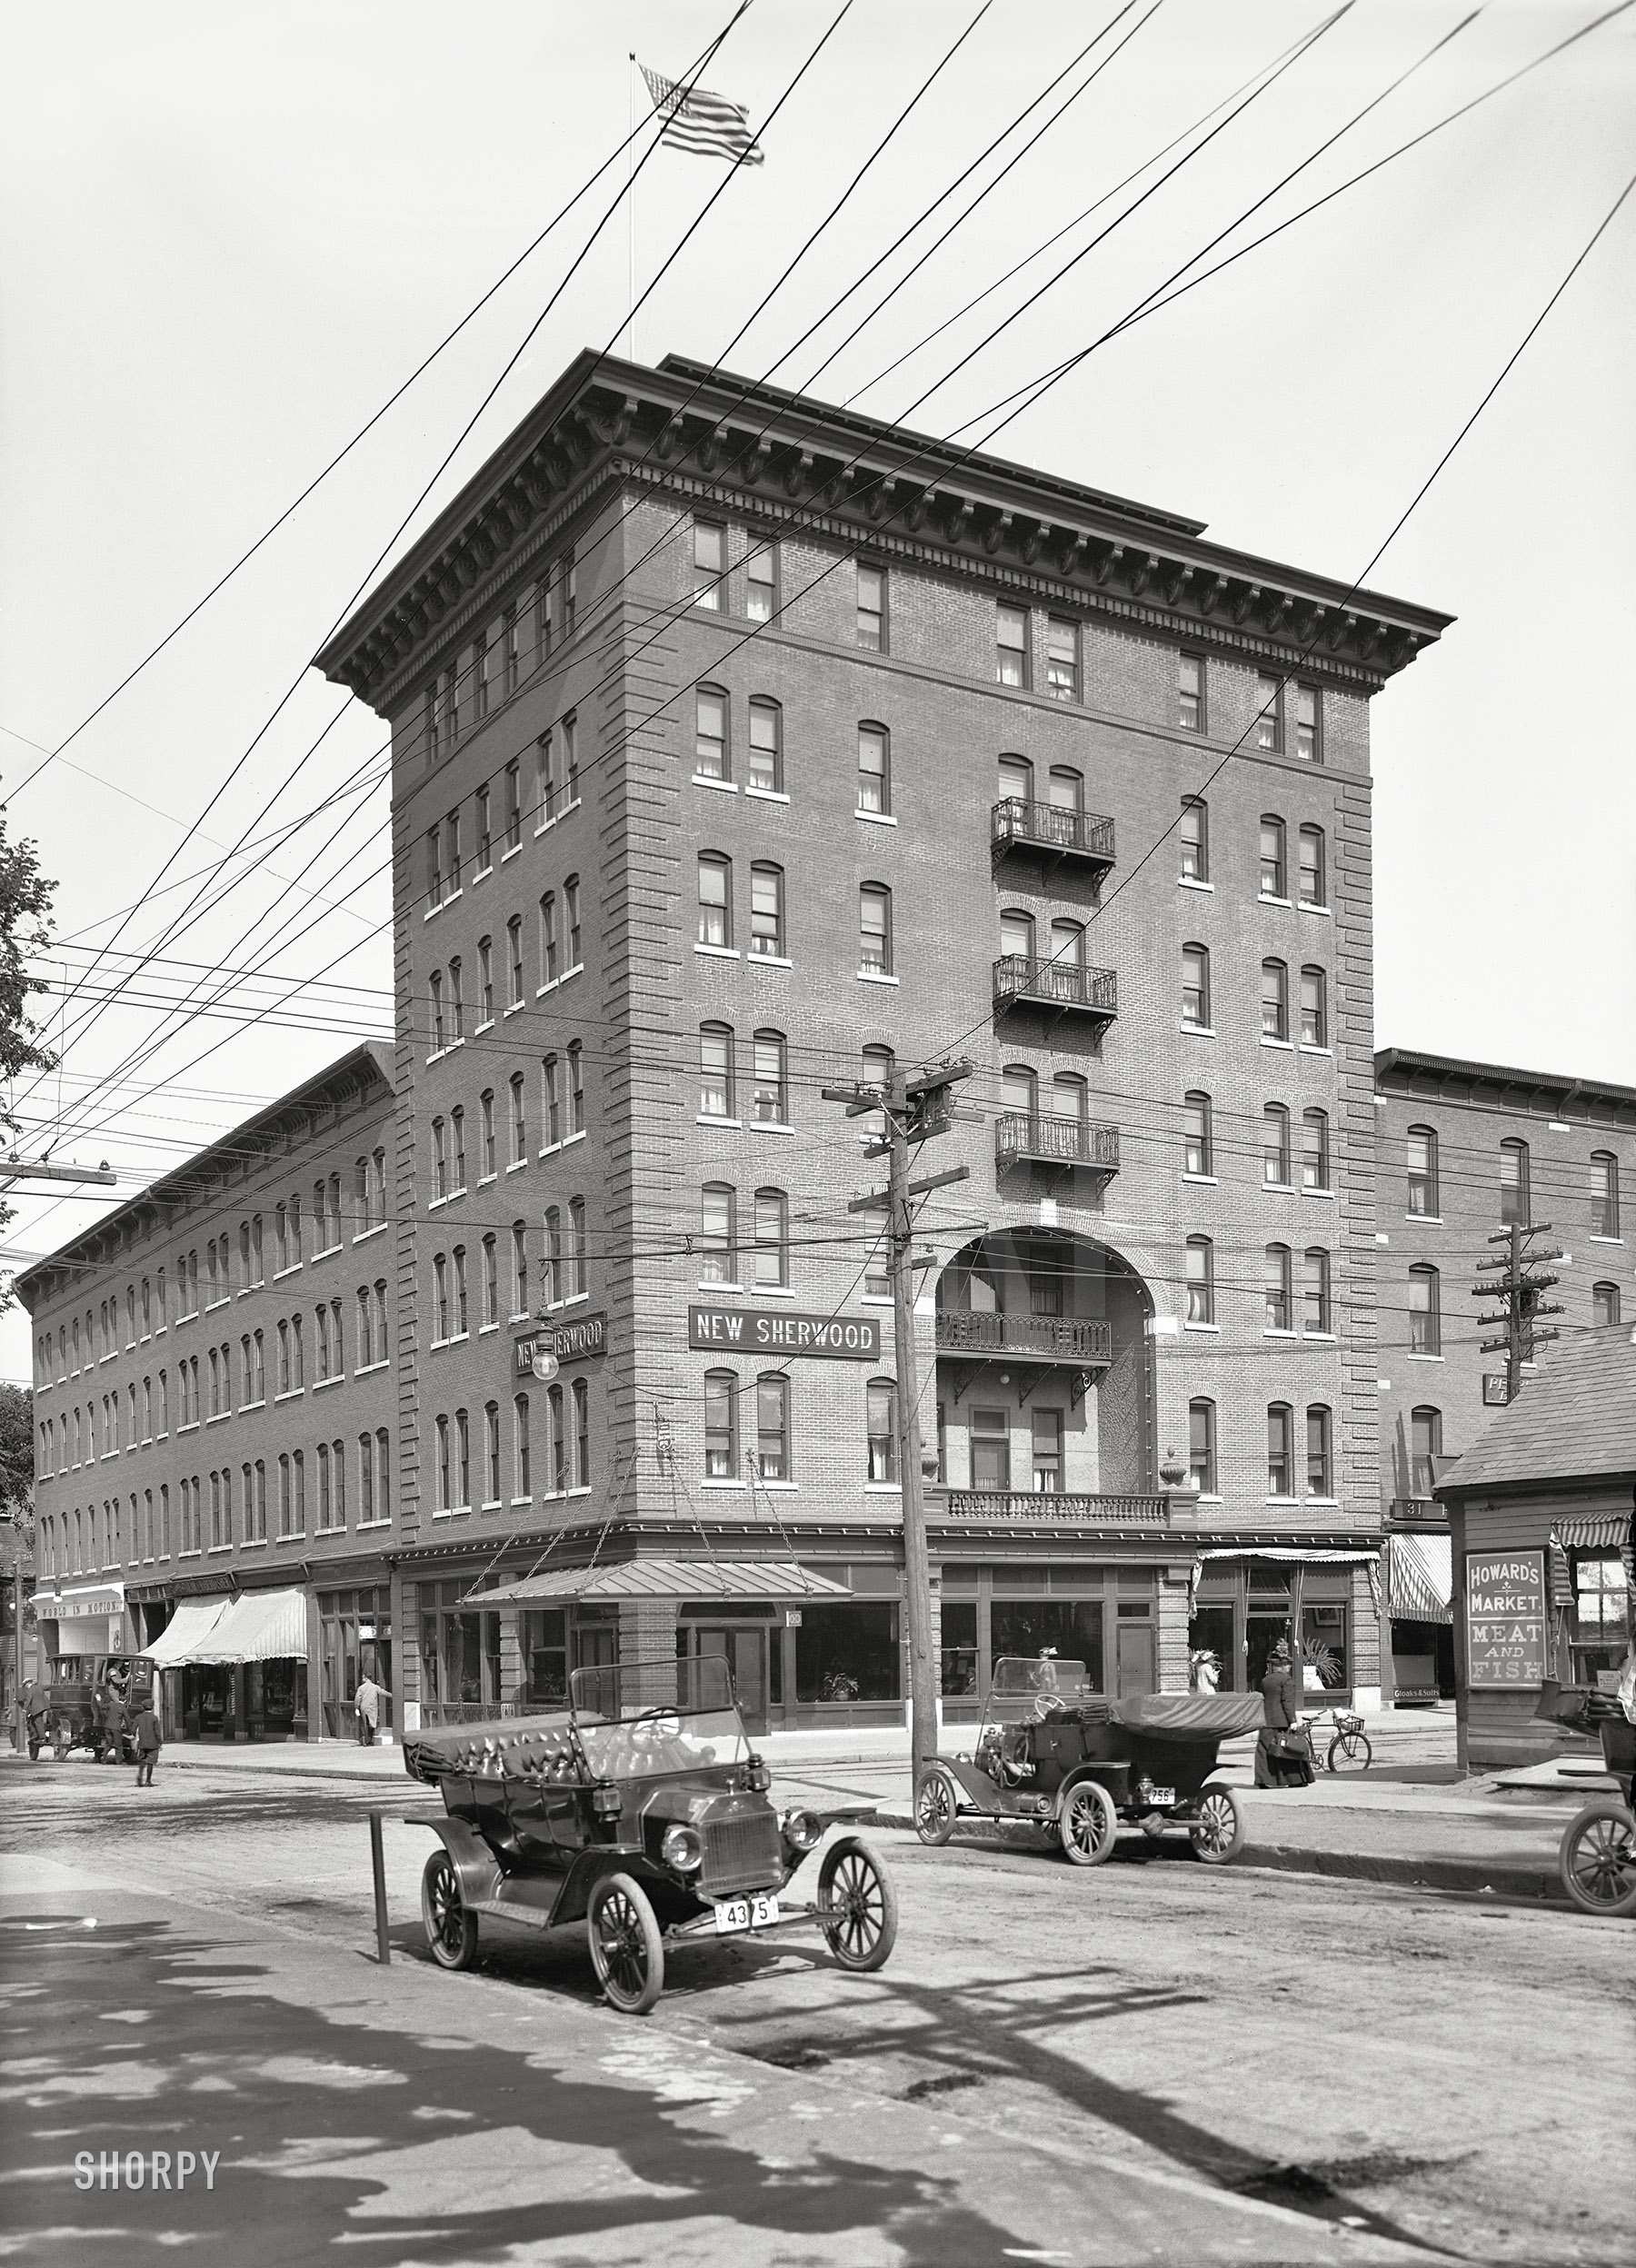 Burlington, Vermont, circa 1913. "New Sherwood Hotel, Church and Cherry Sts." Destroyed by fire in 1940. 7x5 inch dry plate glass negative. View full size.